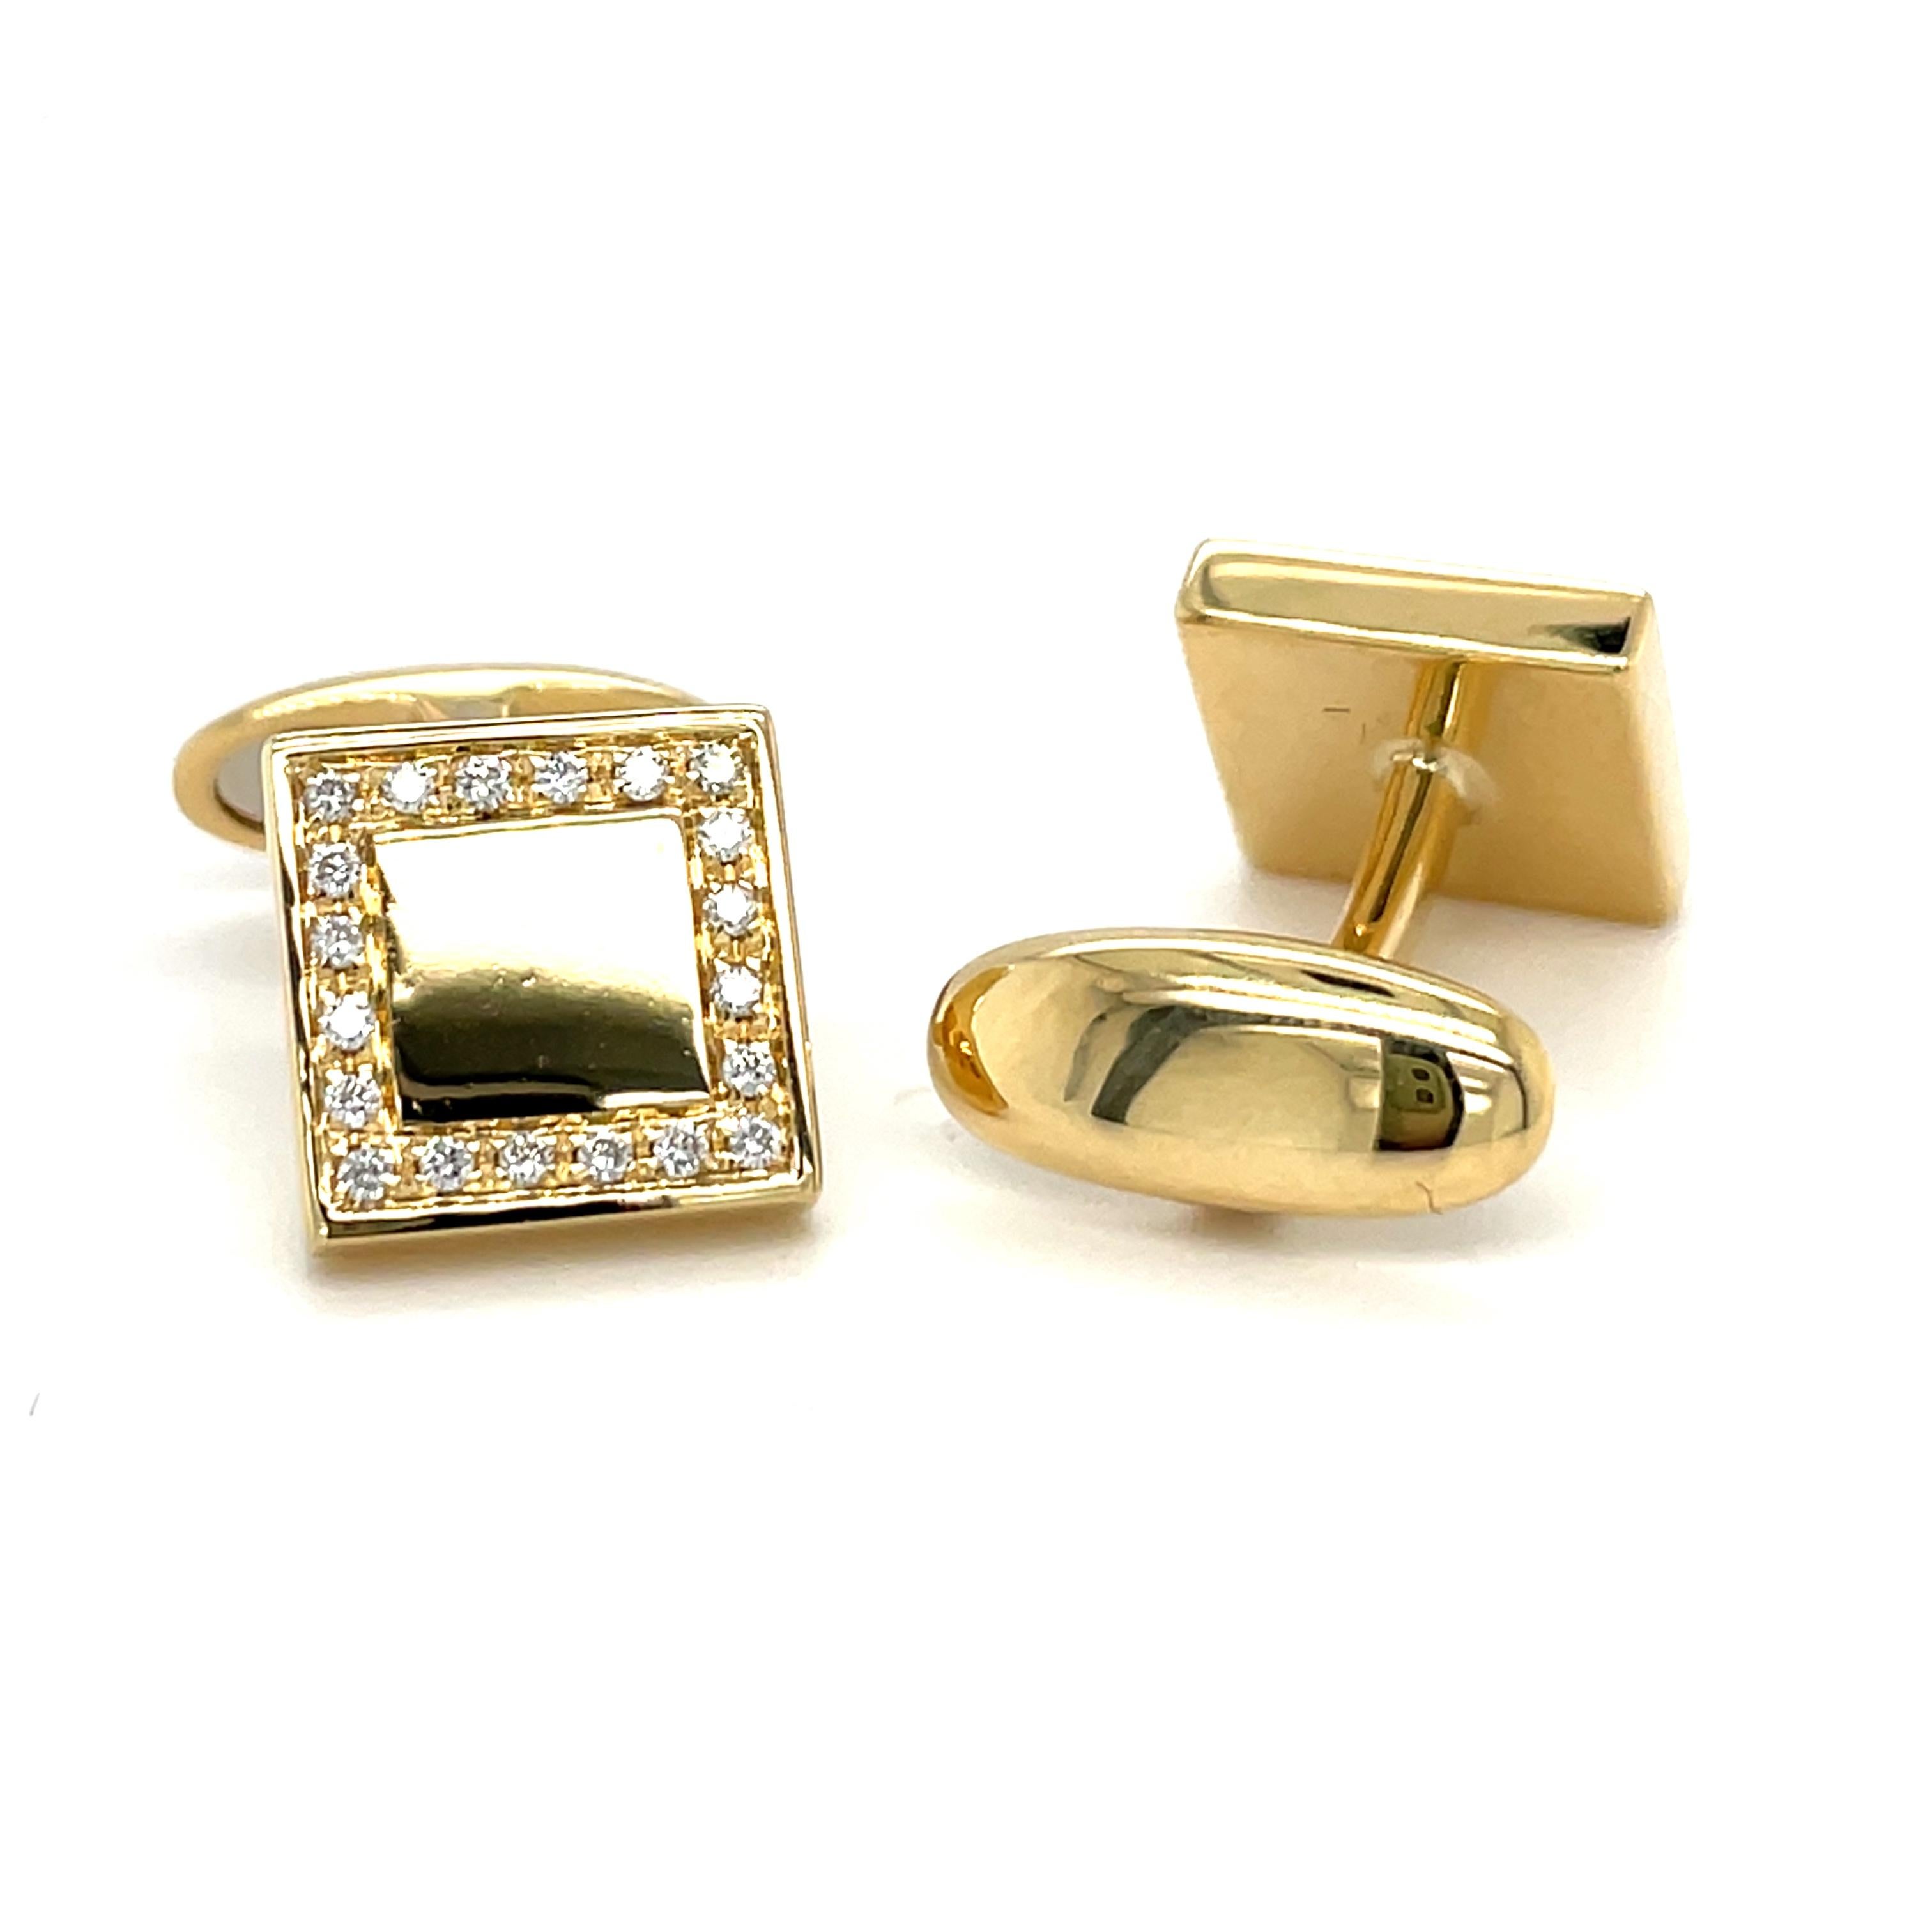 These yelllow gold cufflinks are from Men's Collection. These cufflinks are decorated with diamonds G color VS2 clarity. The total amount of diamonds is 0.34 Carat. The dimensions of the cufflinks are 1.1cm x 1.1cm. These cufflinks are a perfect